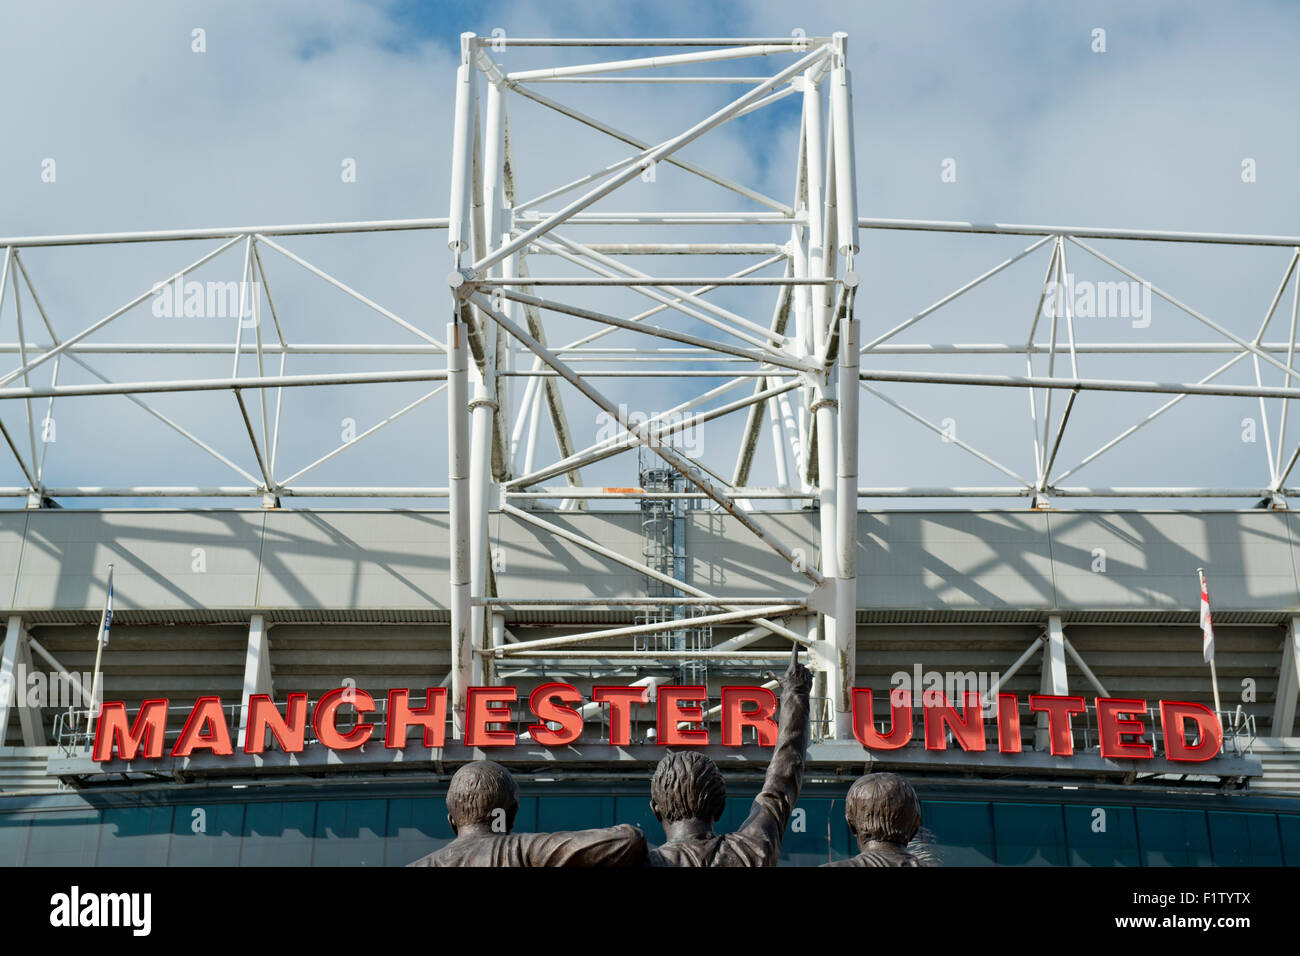 The sign of Manchester United Football Club on the side of the club's stadium of Old Trafford (Editorial use only) Stock Photo